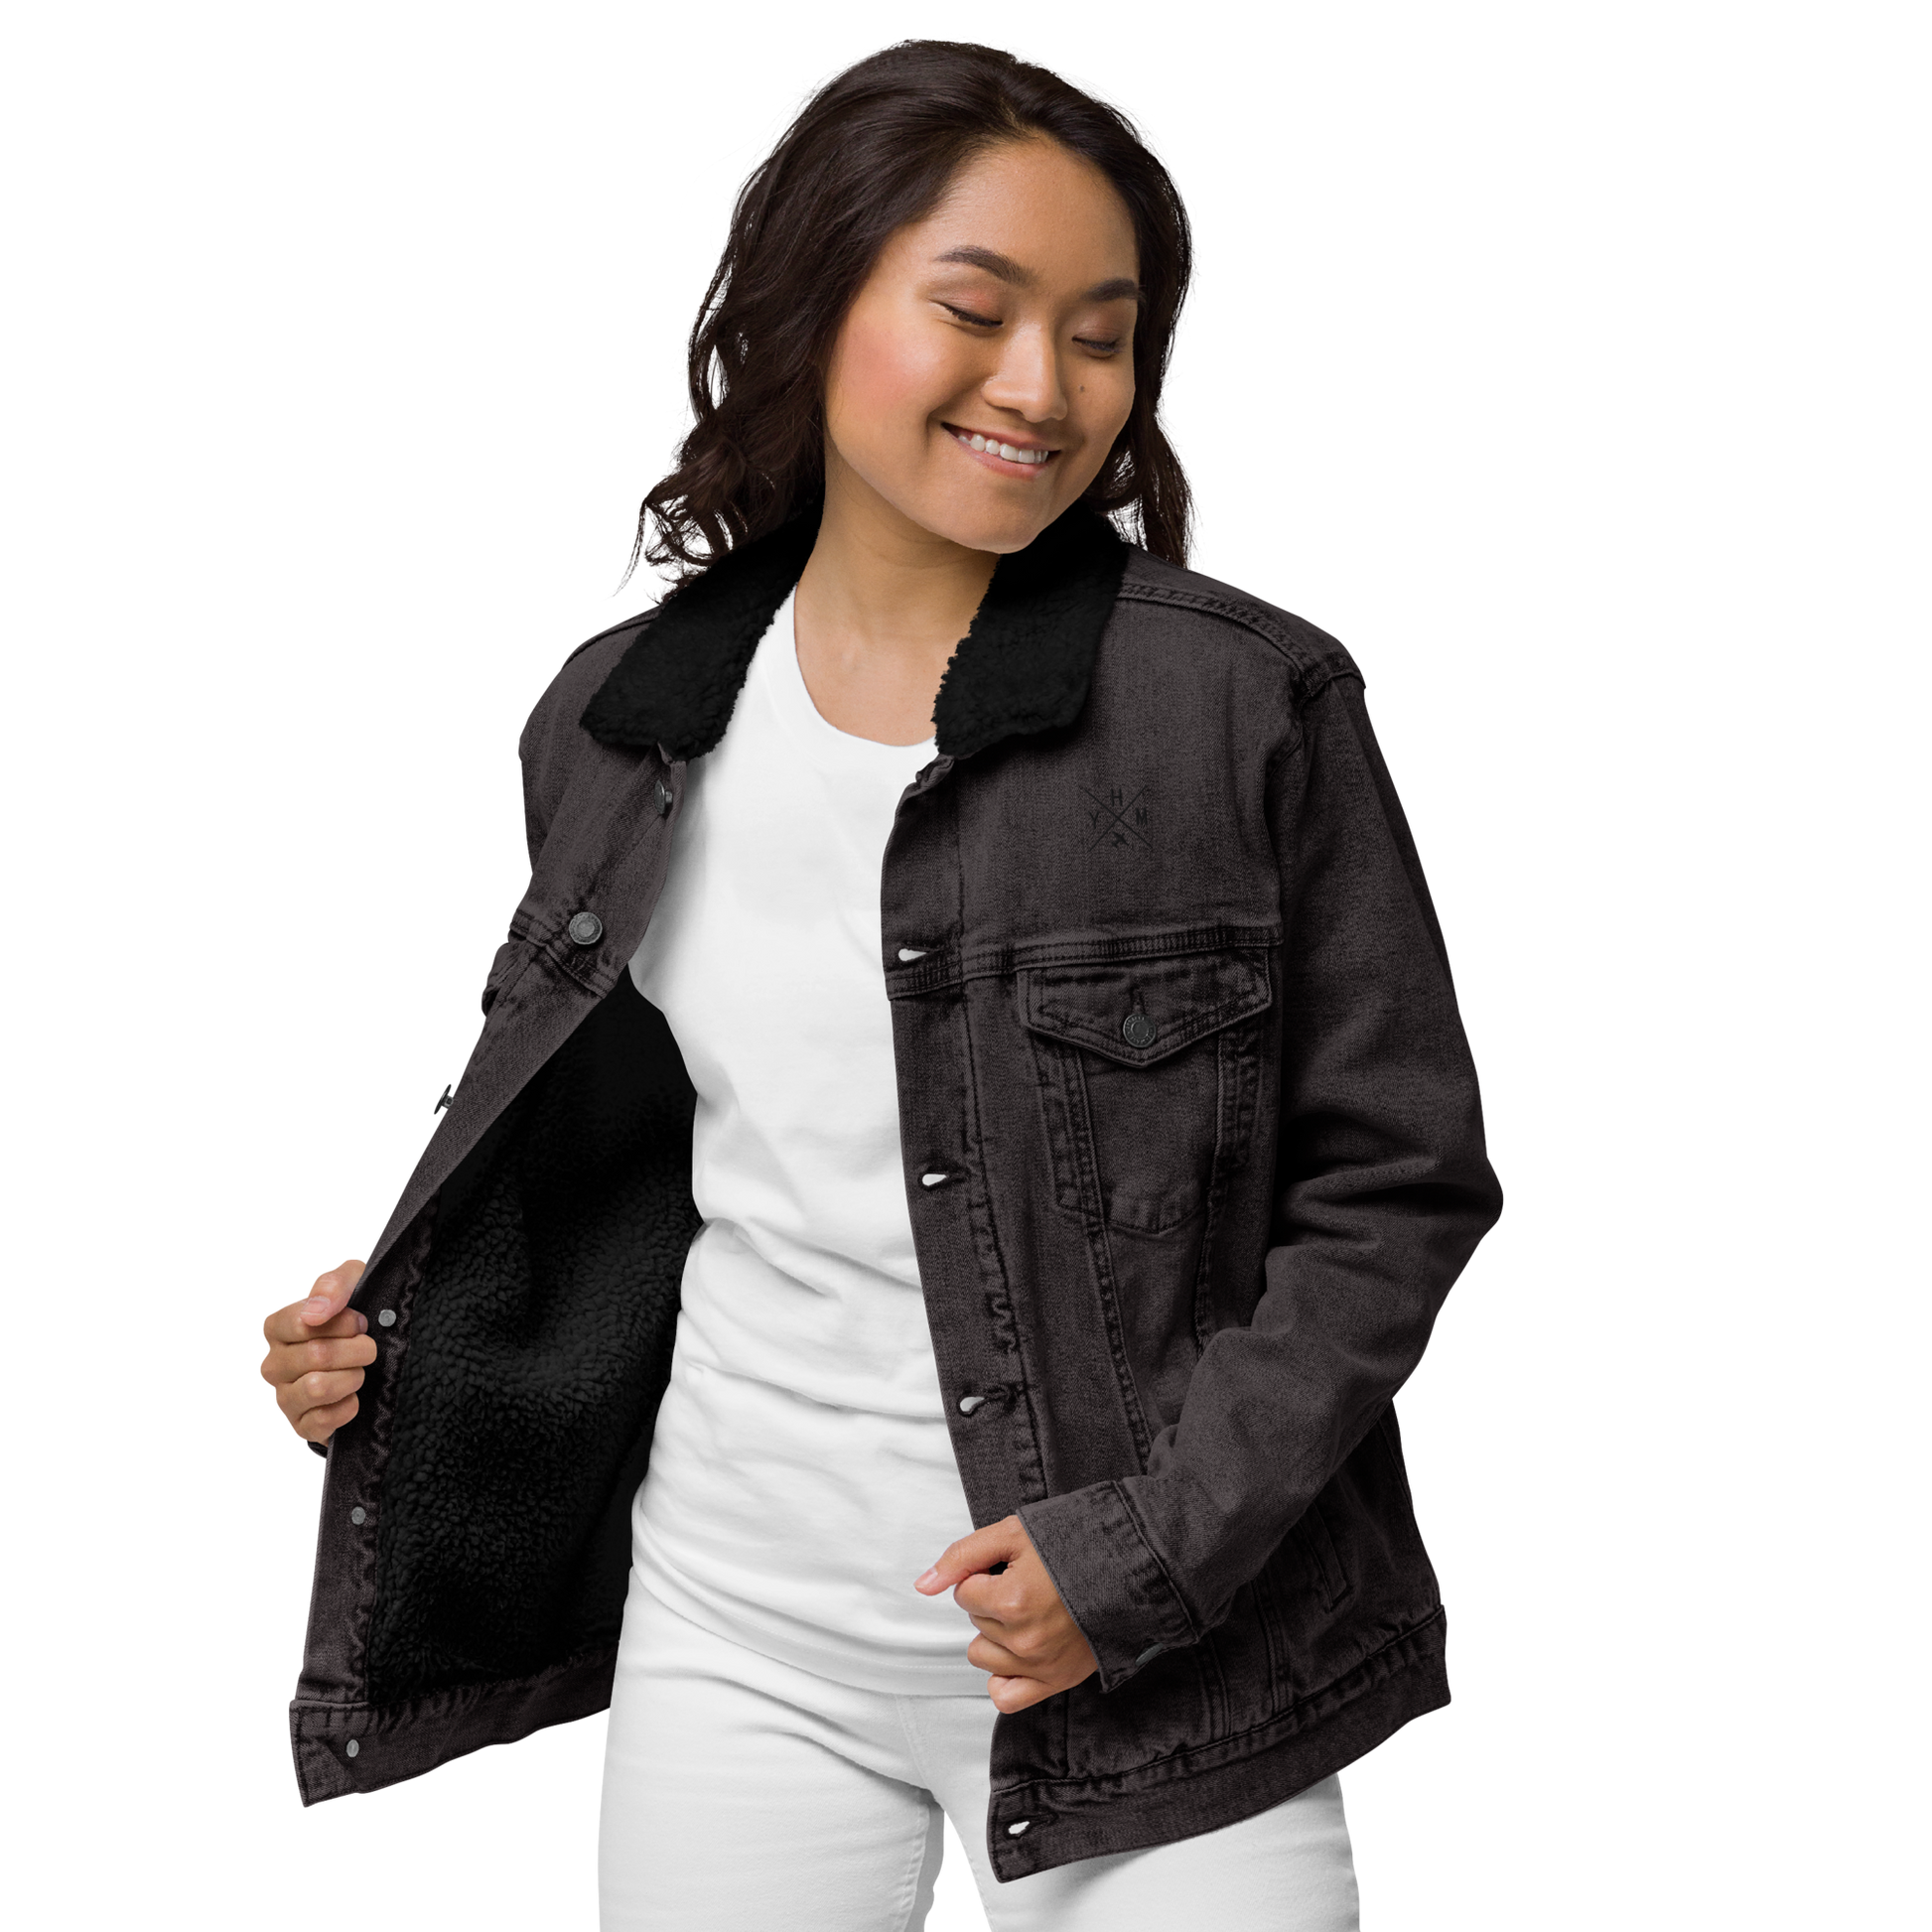 YHM Designs - YHM Hamilton Denim Sherpa Jacket - Crossed-X Design with Airport Code and Vintage Propliner - Black & White Embroidery - Image 05